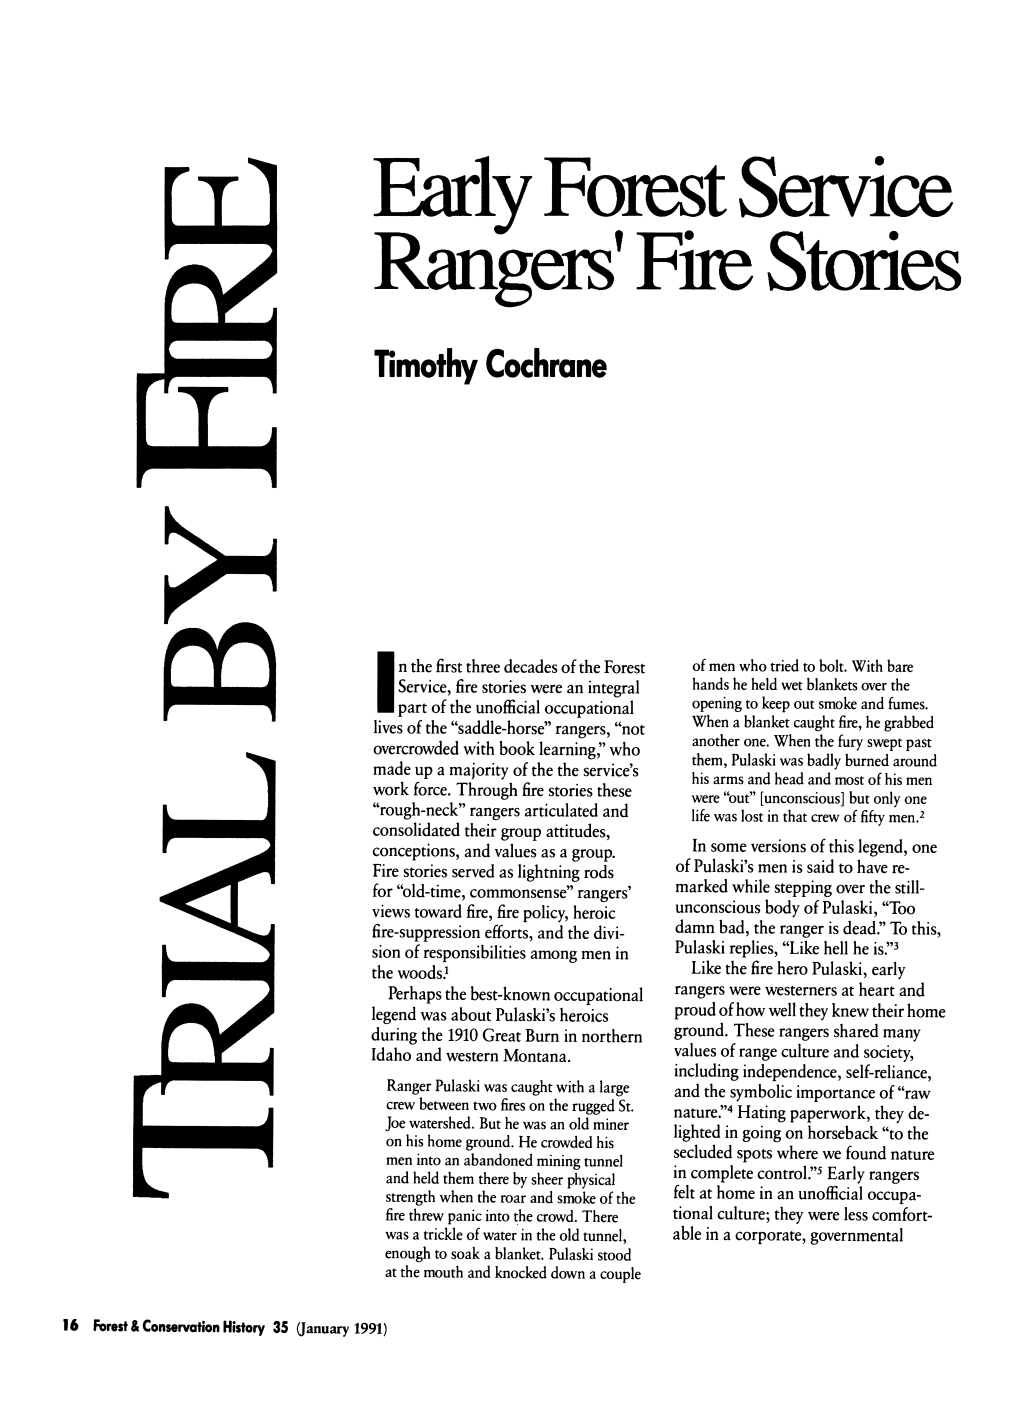 Early Forest Service Rangers' Fire Stories